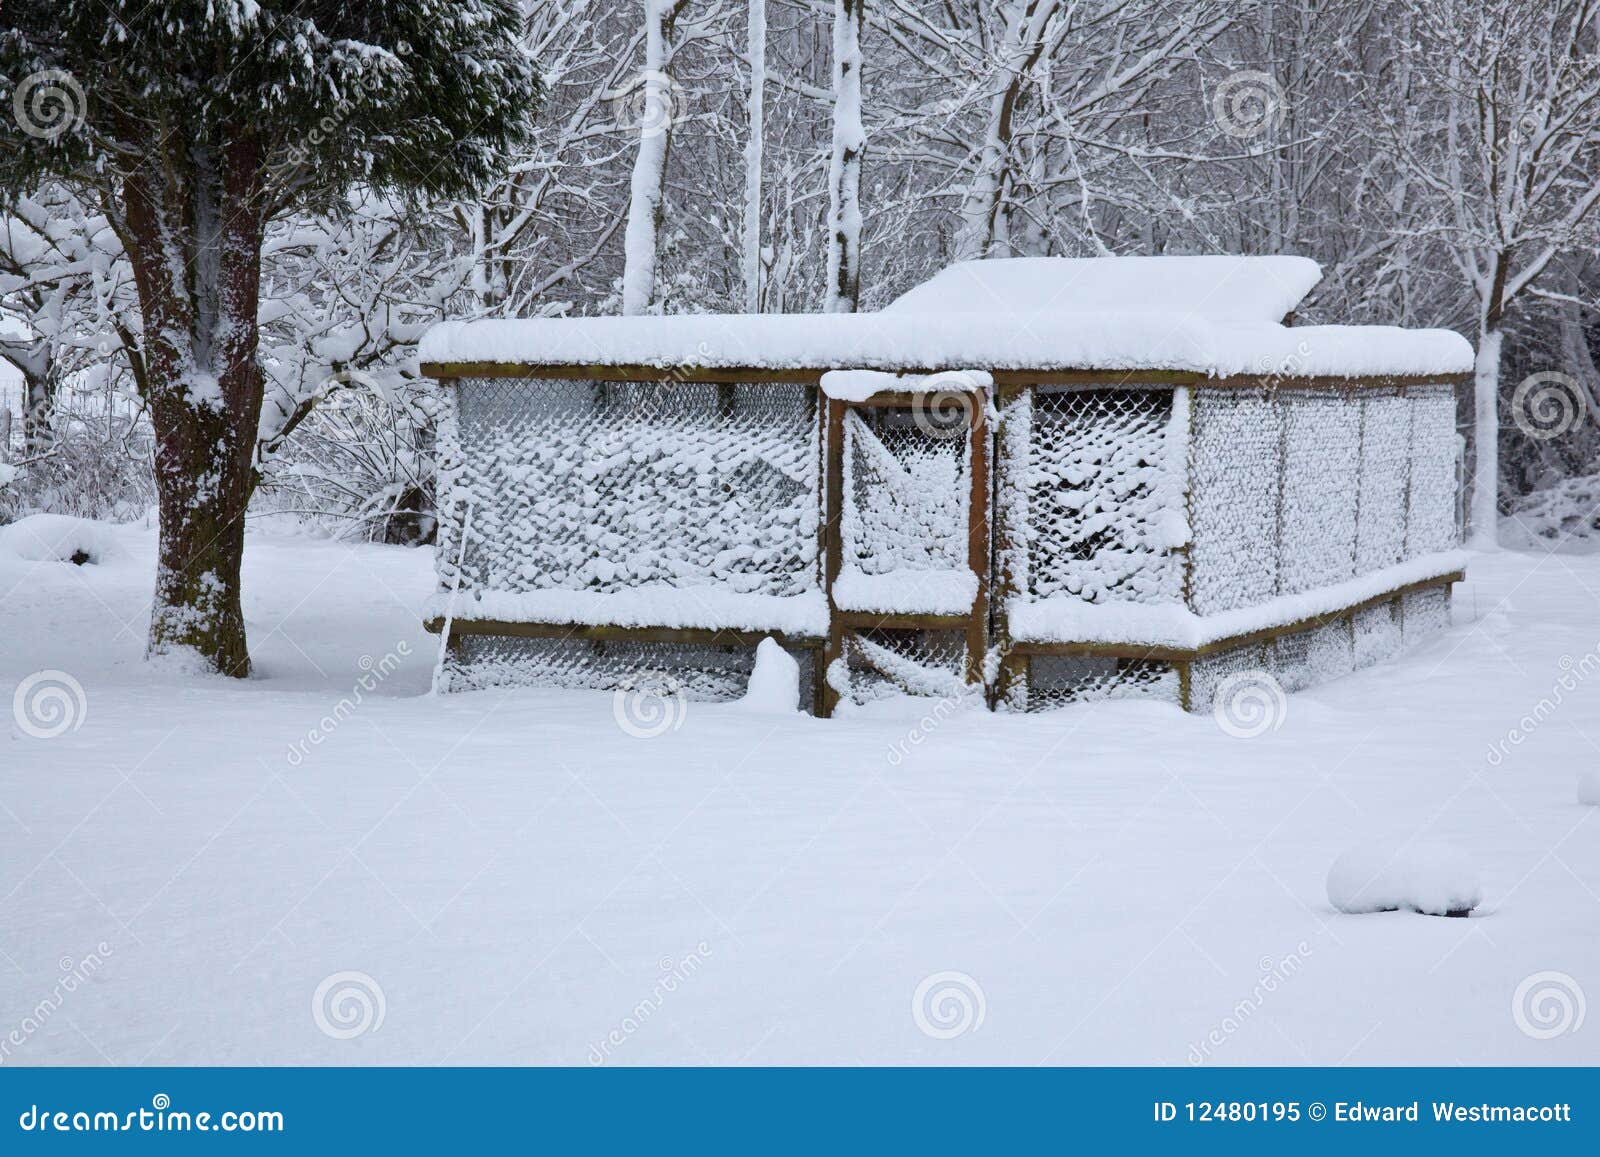 Snow Covered Chicken Coop Royalty Free Stock Photo - Image: 12480195